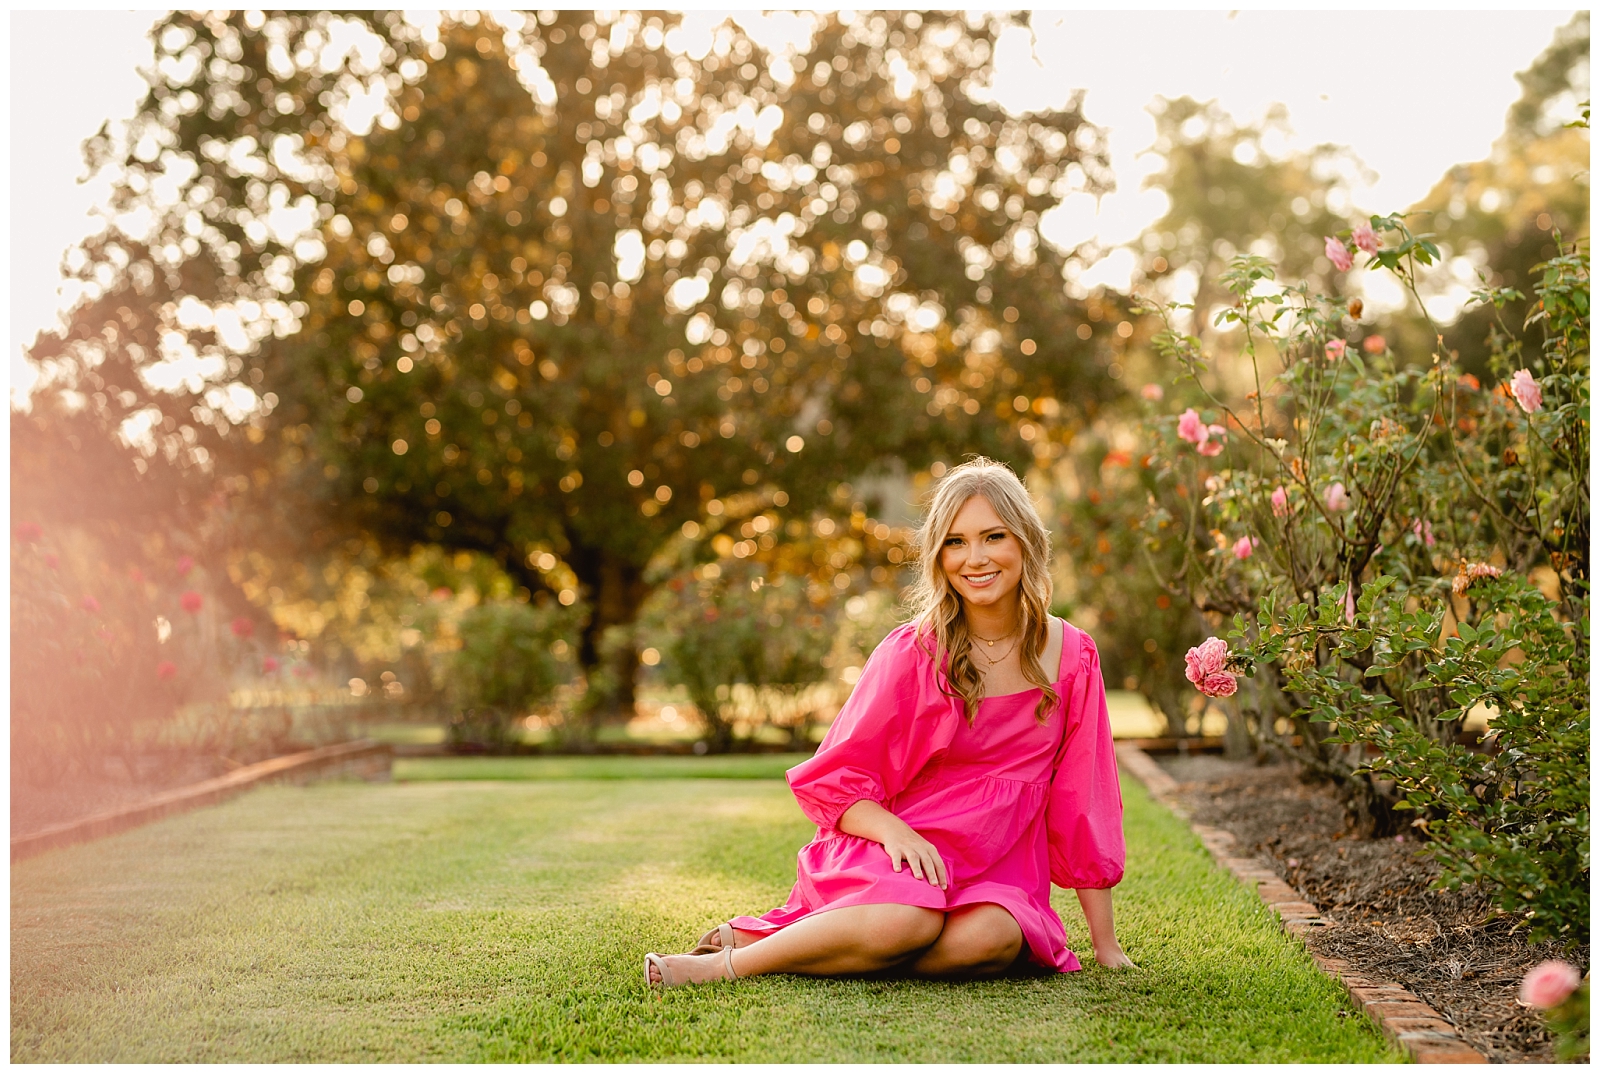 Senior Pictures in Thomasville, Georgia at the Rose Garden during sunset.